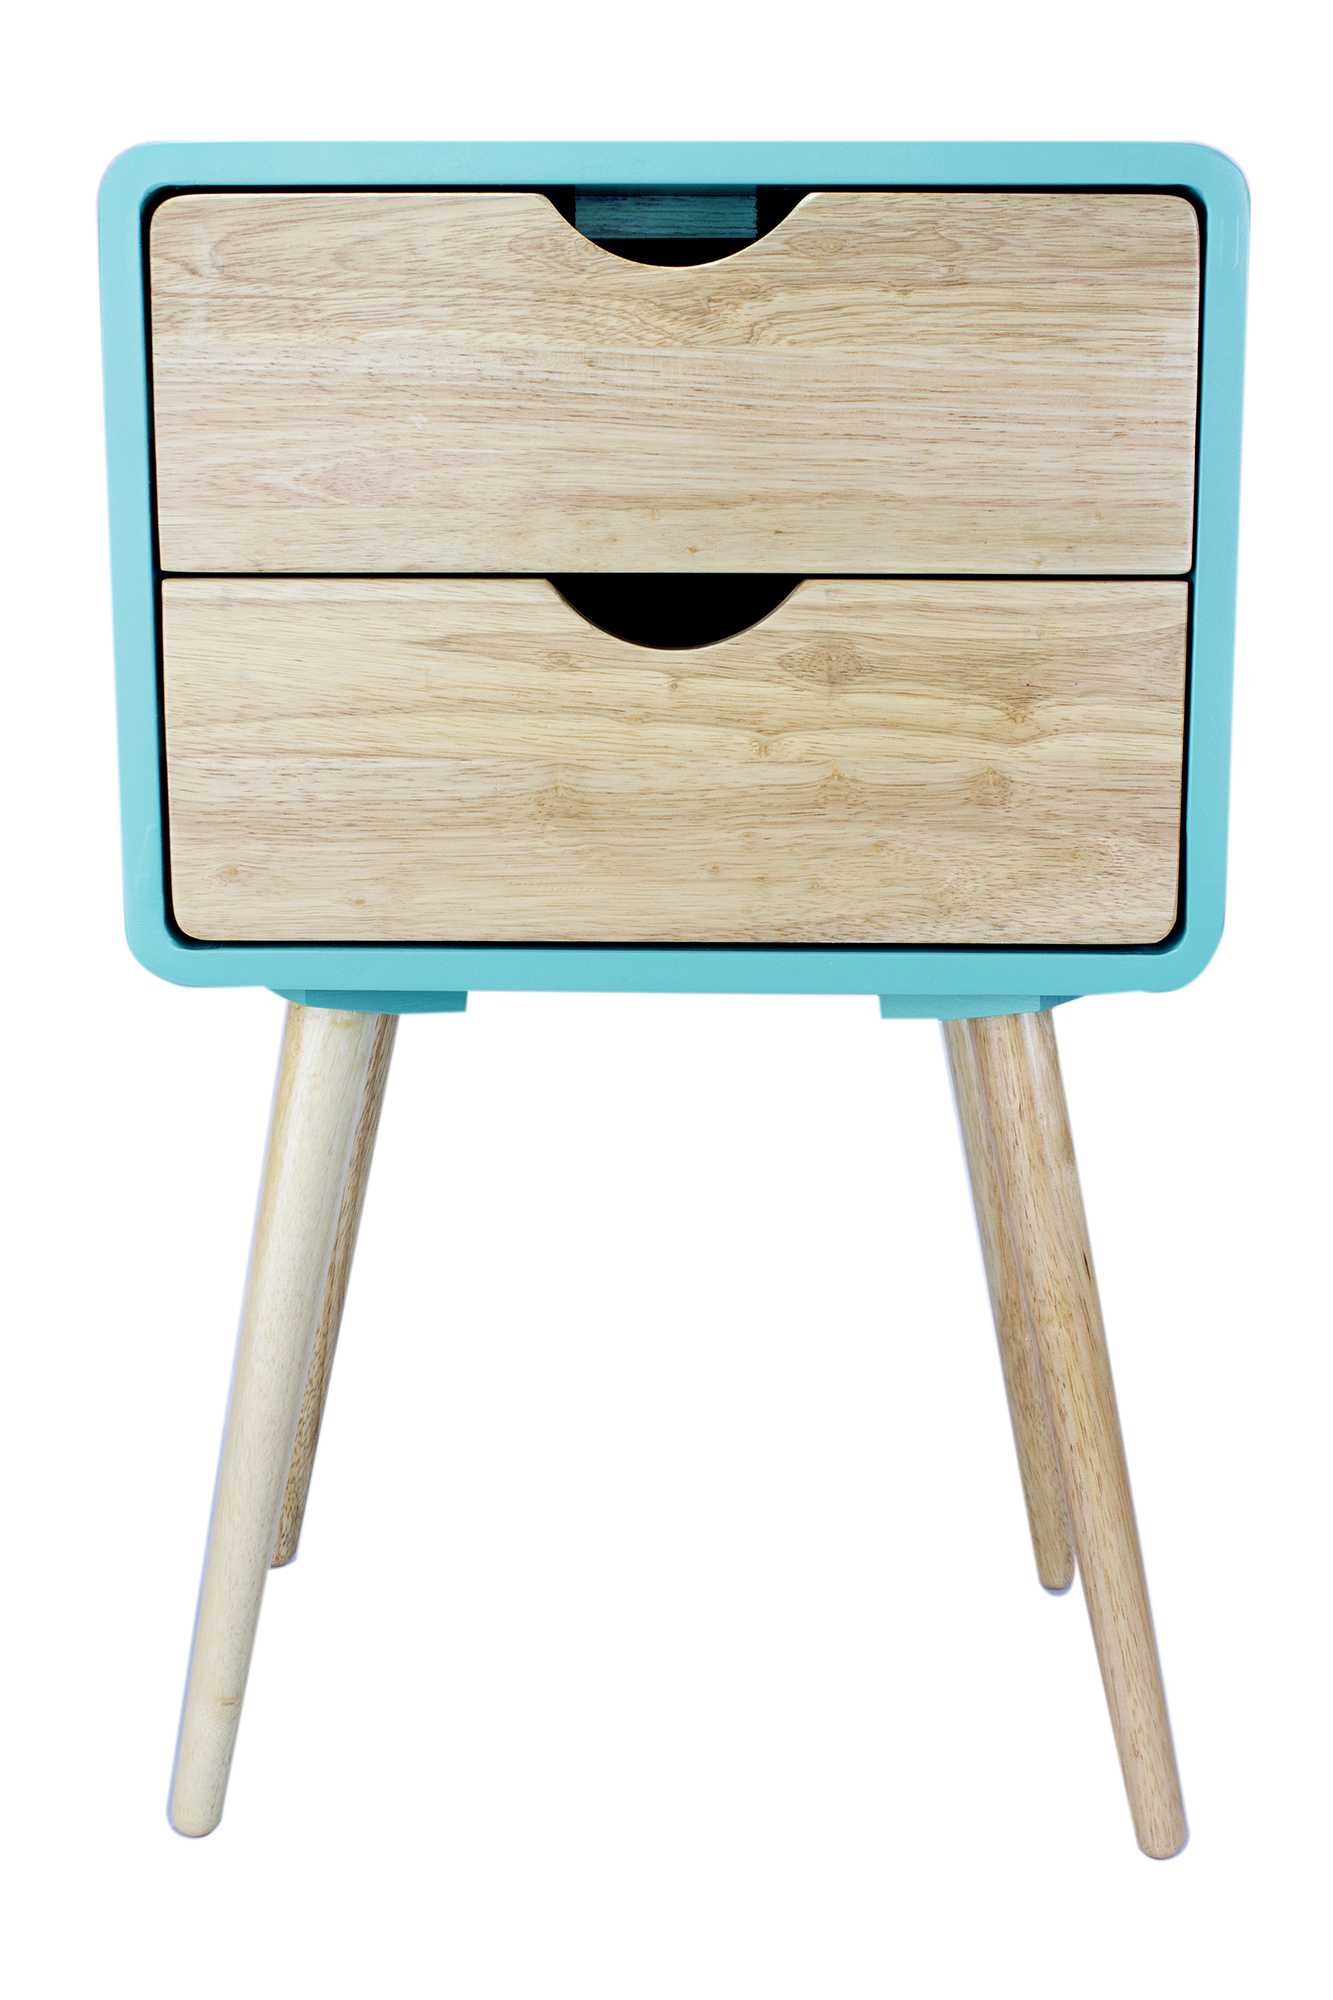 16" X 12" X 26" Aqua MDF Wood End Table with Drawers